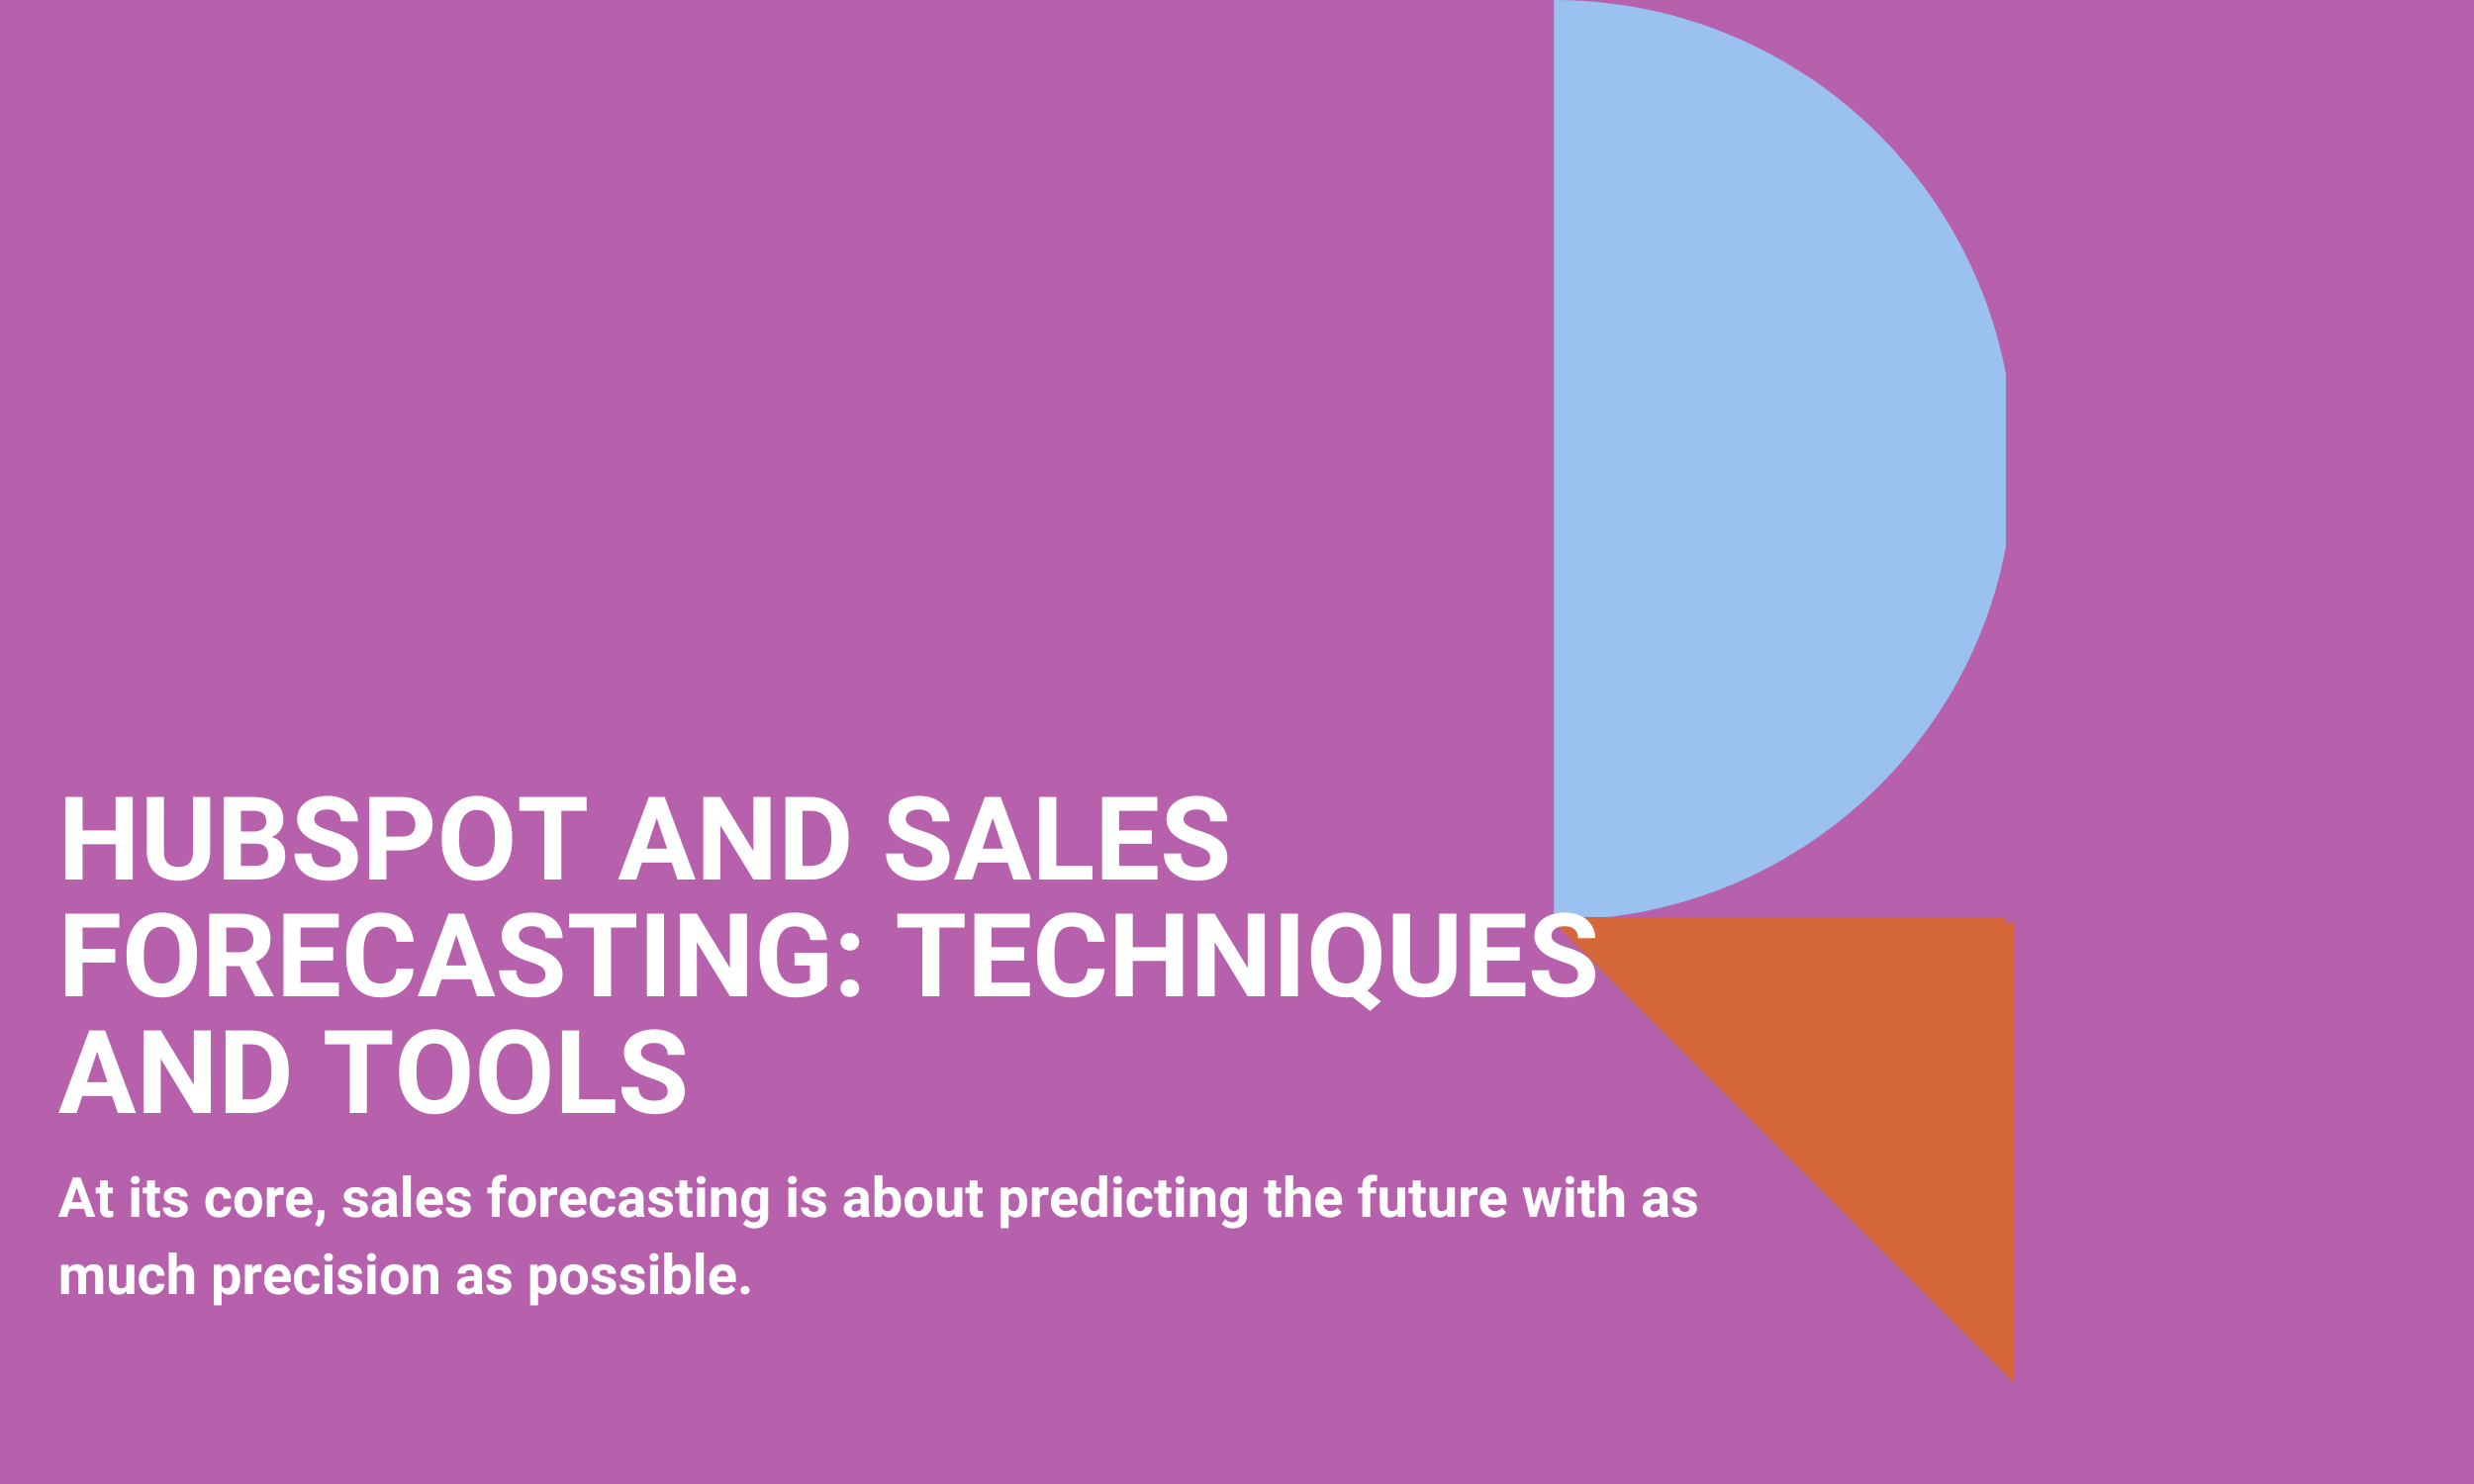 HubSpot and Sales Forecasting: Techniques and Tools